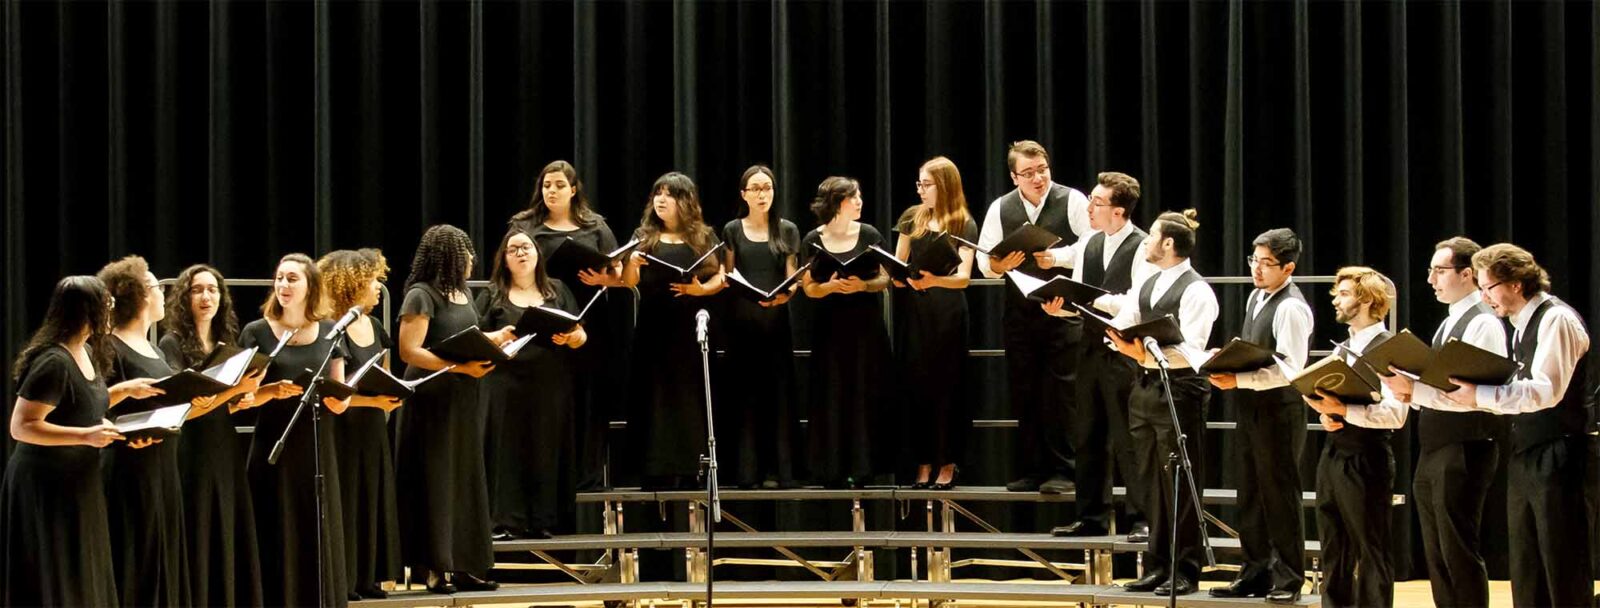 Concert Choir. Group with their music notes in hand, singing